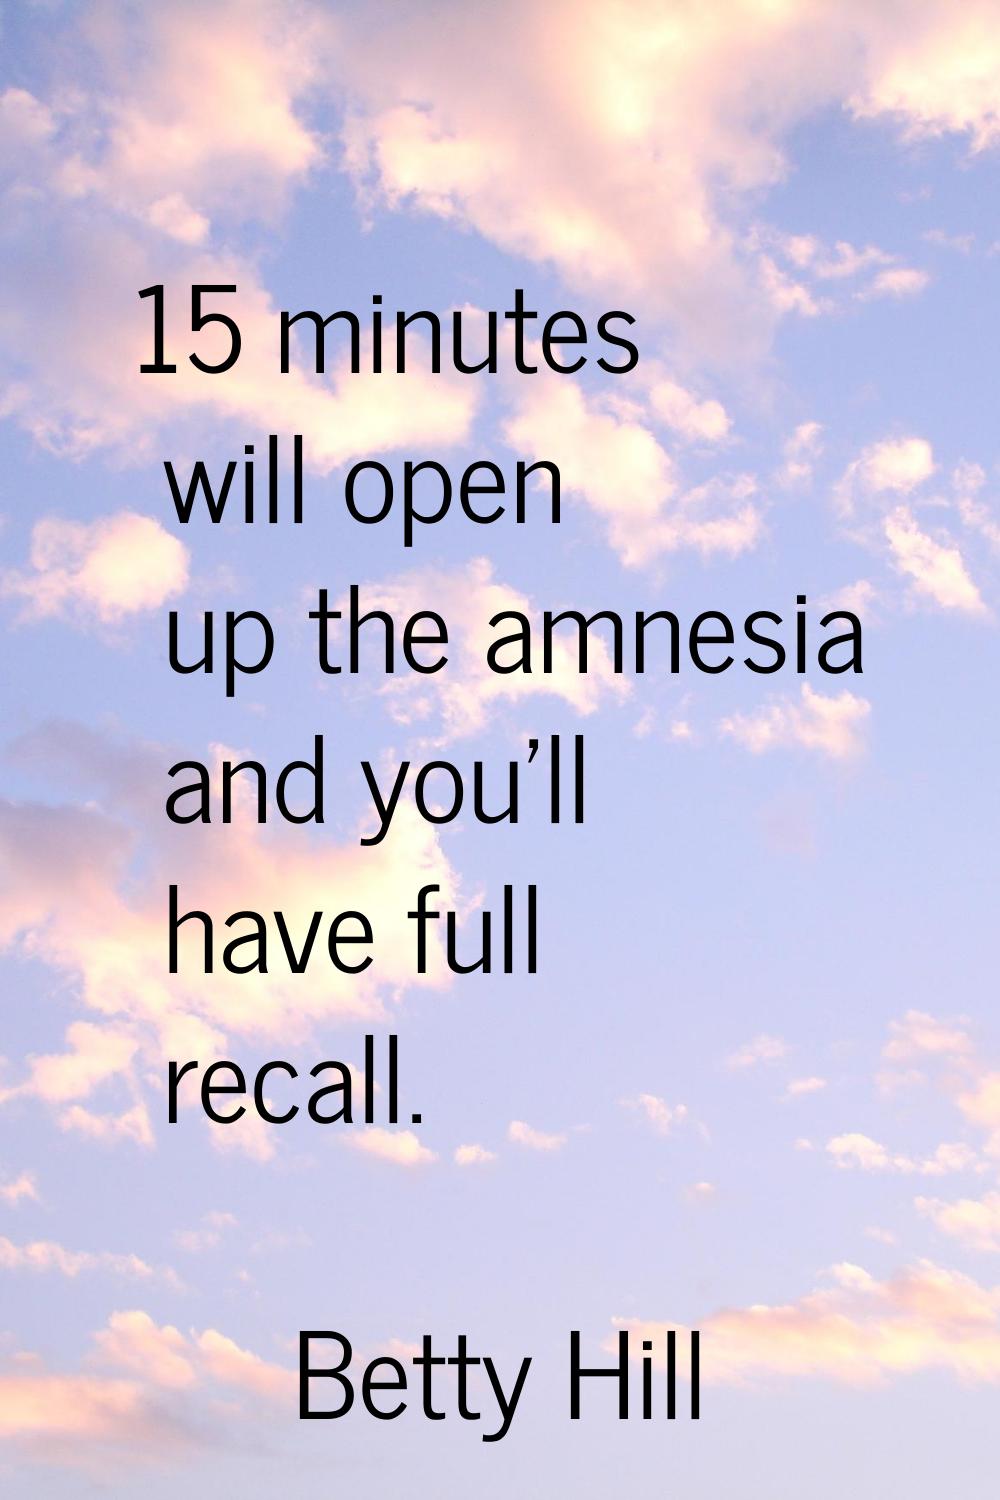 15 minutes will open up the amnesia and you'll have full recall.